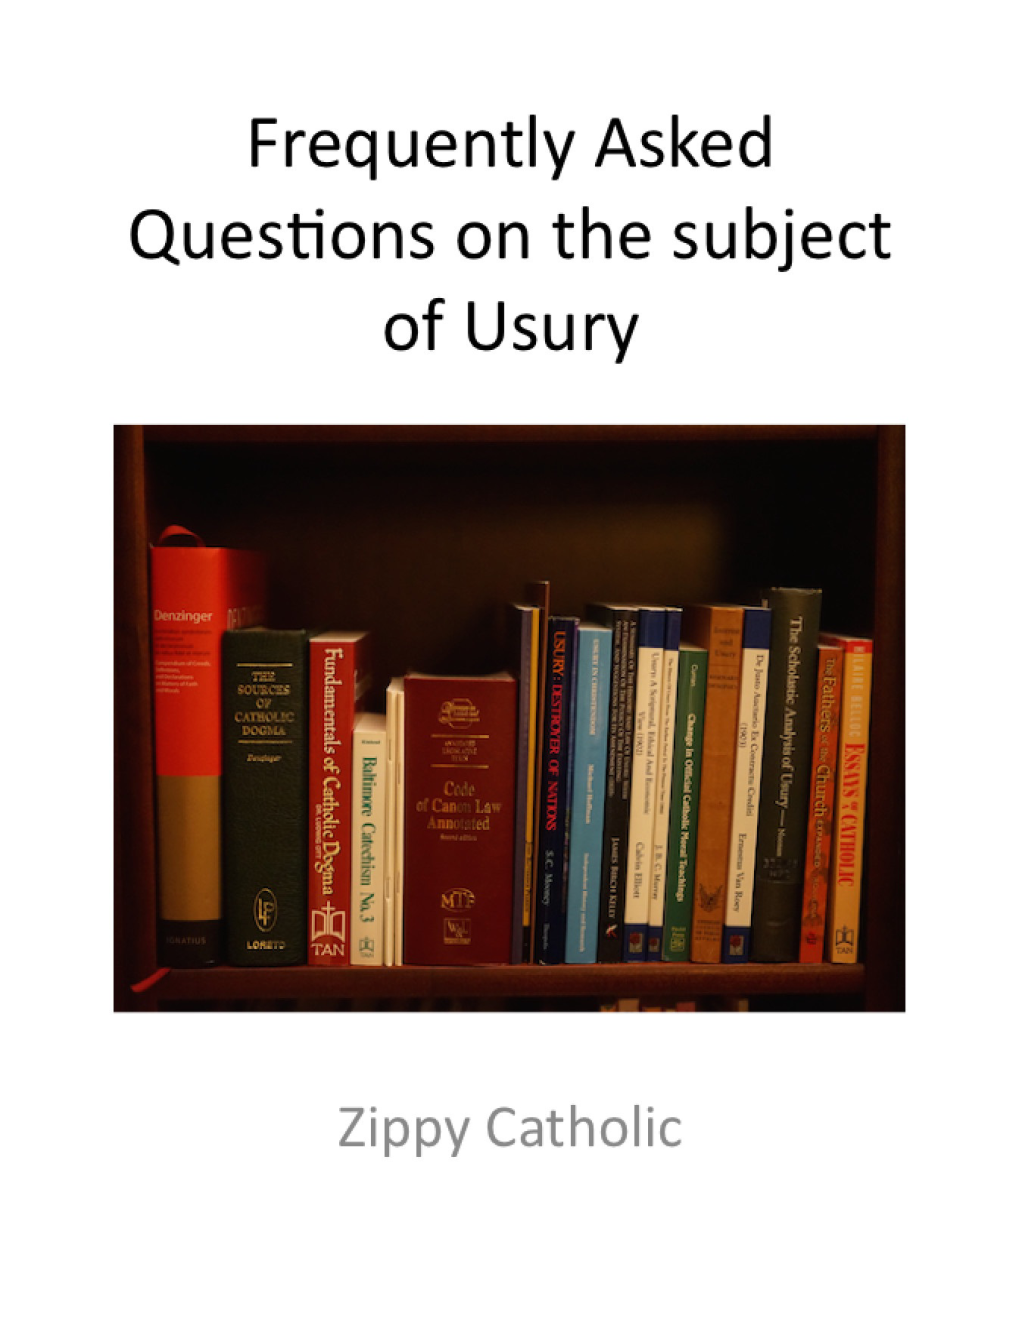 Frequently Asked Questions on the Subject of Usury